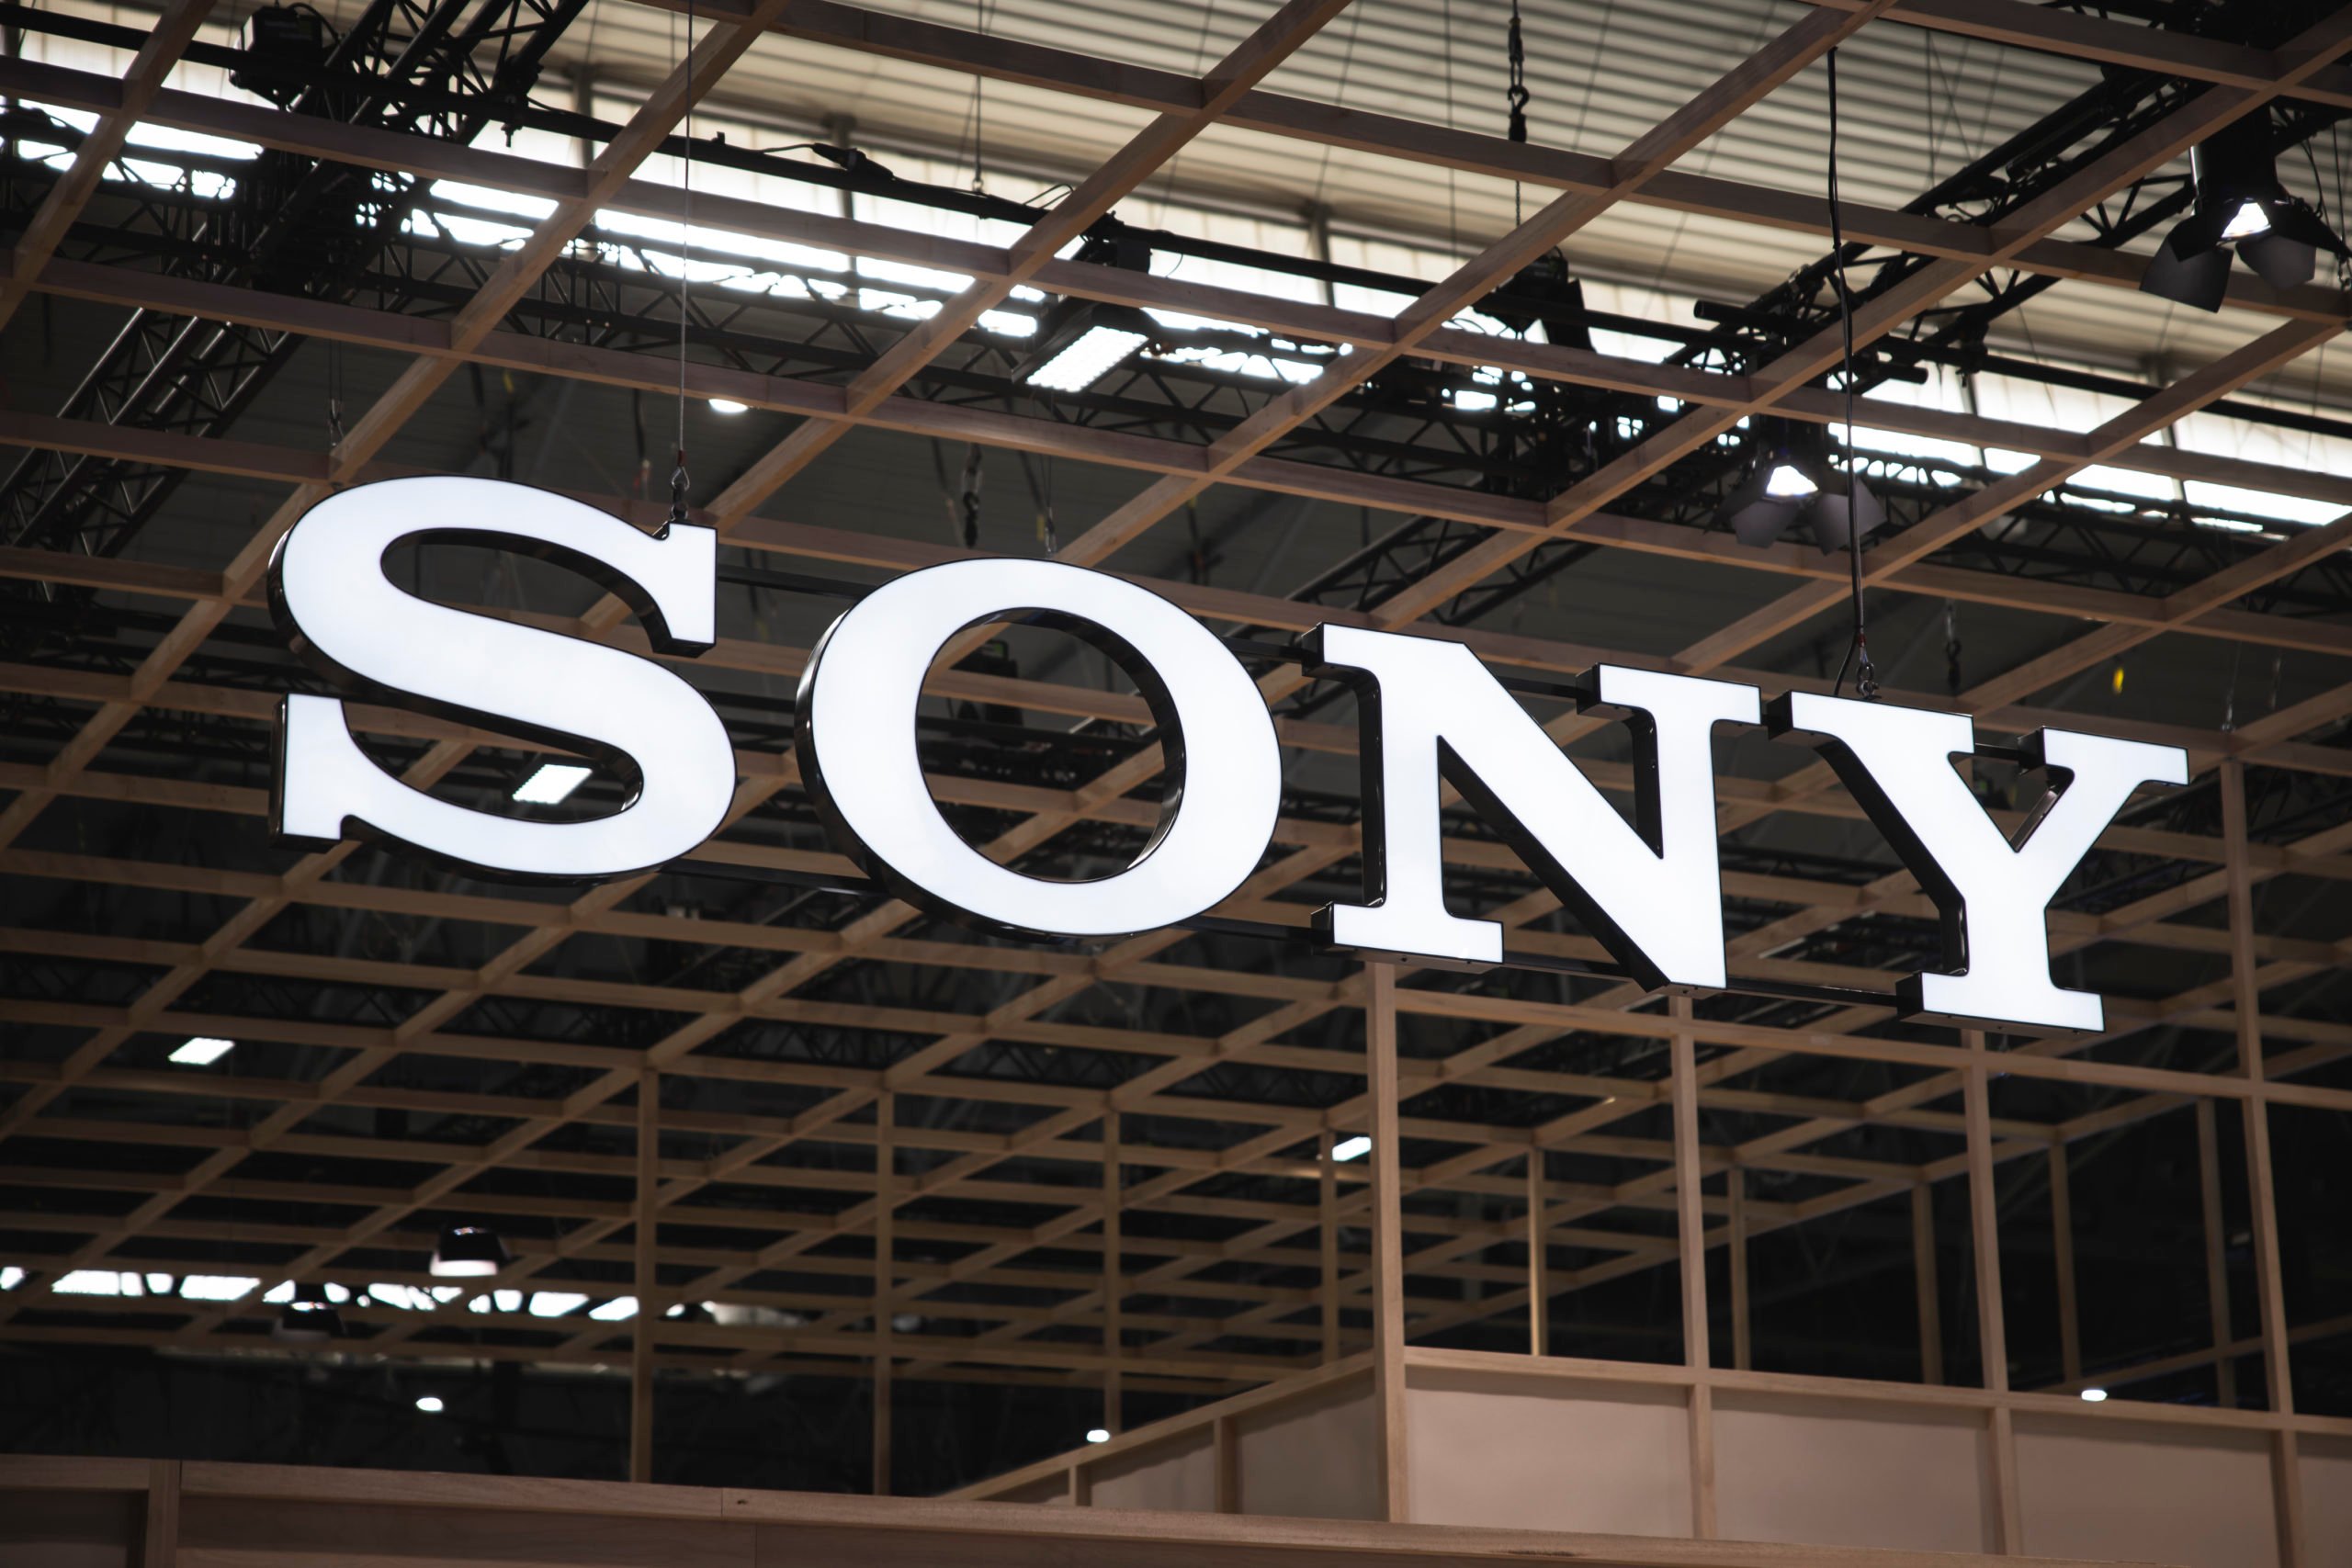 BARCELONA, SPAIN - JANUARY 30: A logo sits illuminated outside the Sony booth at ISE 2024 on January 30, 2024 in Barcelona, Spain. This year the 20th edition of Integrated Systems Europe (ISE) is being held, the sixth in Barcelona. The hall occupies the entire surface of the Fira Gran Via exhibition center with 82,000 square meters, 30% more than last year. This year there are 1,340 exhibitors and more than 90,000 visitors are expected to attend. (Photo by Cesc Maymo/Getty Images)